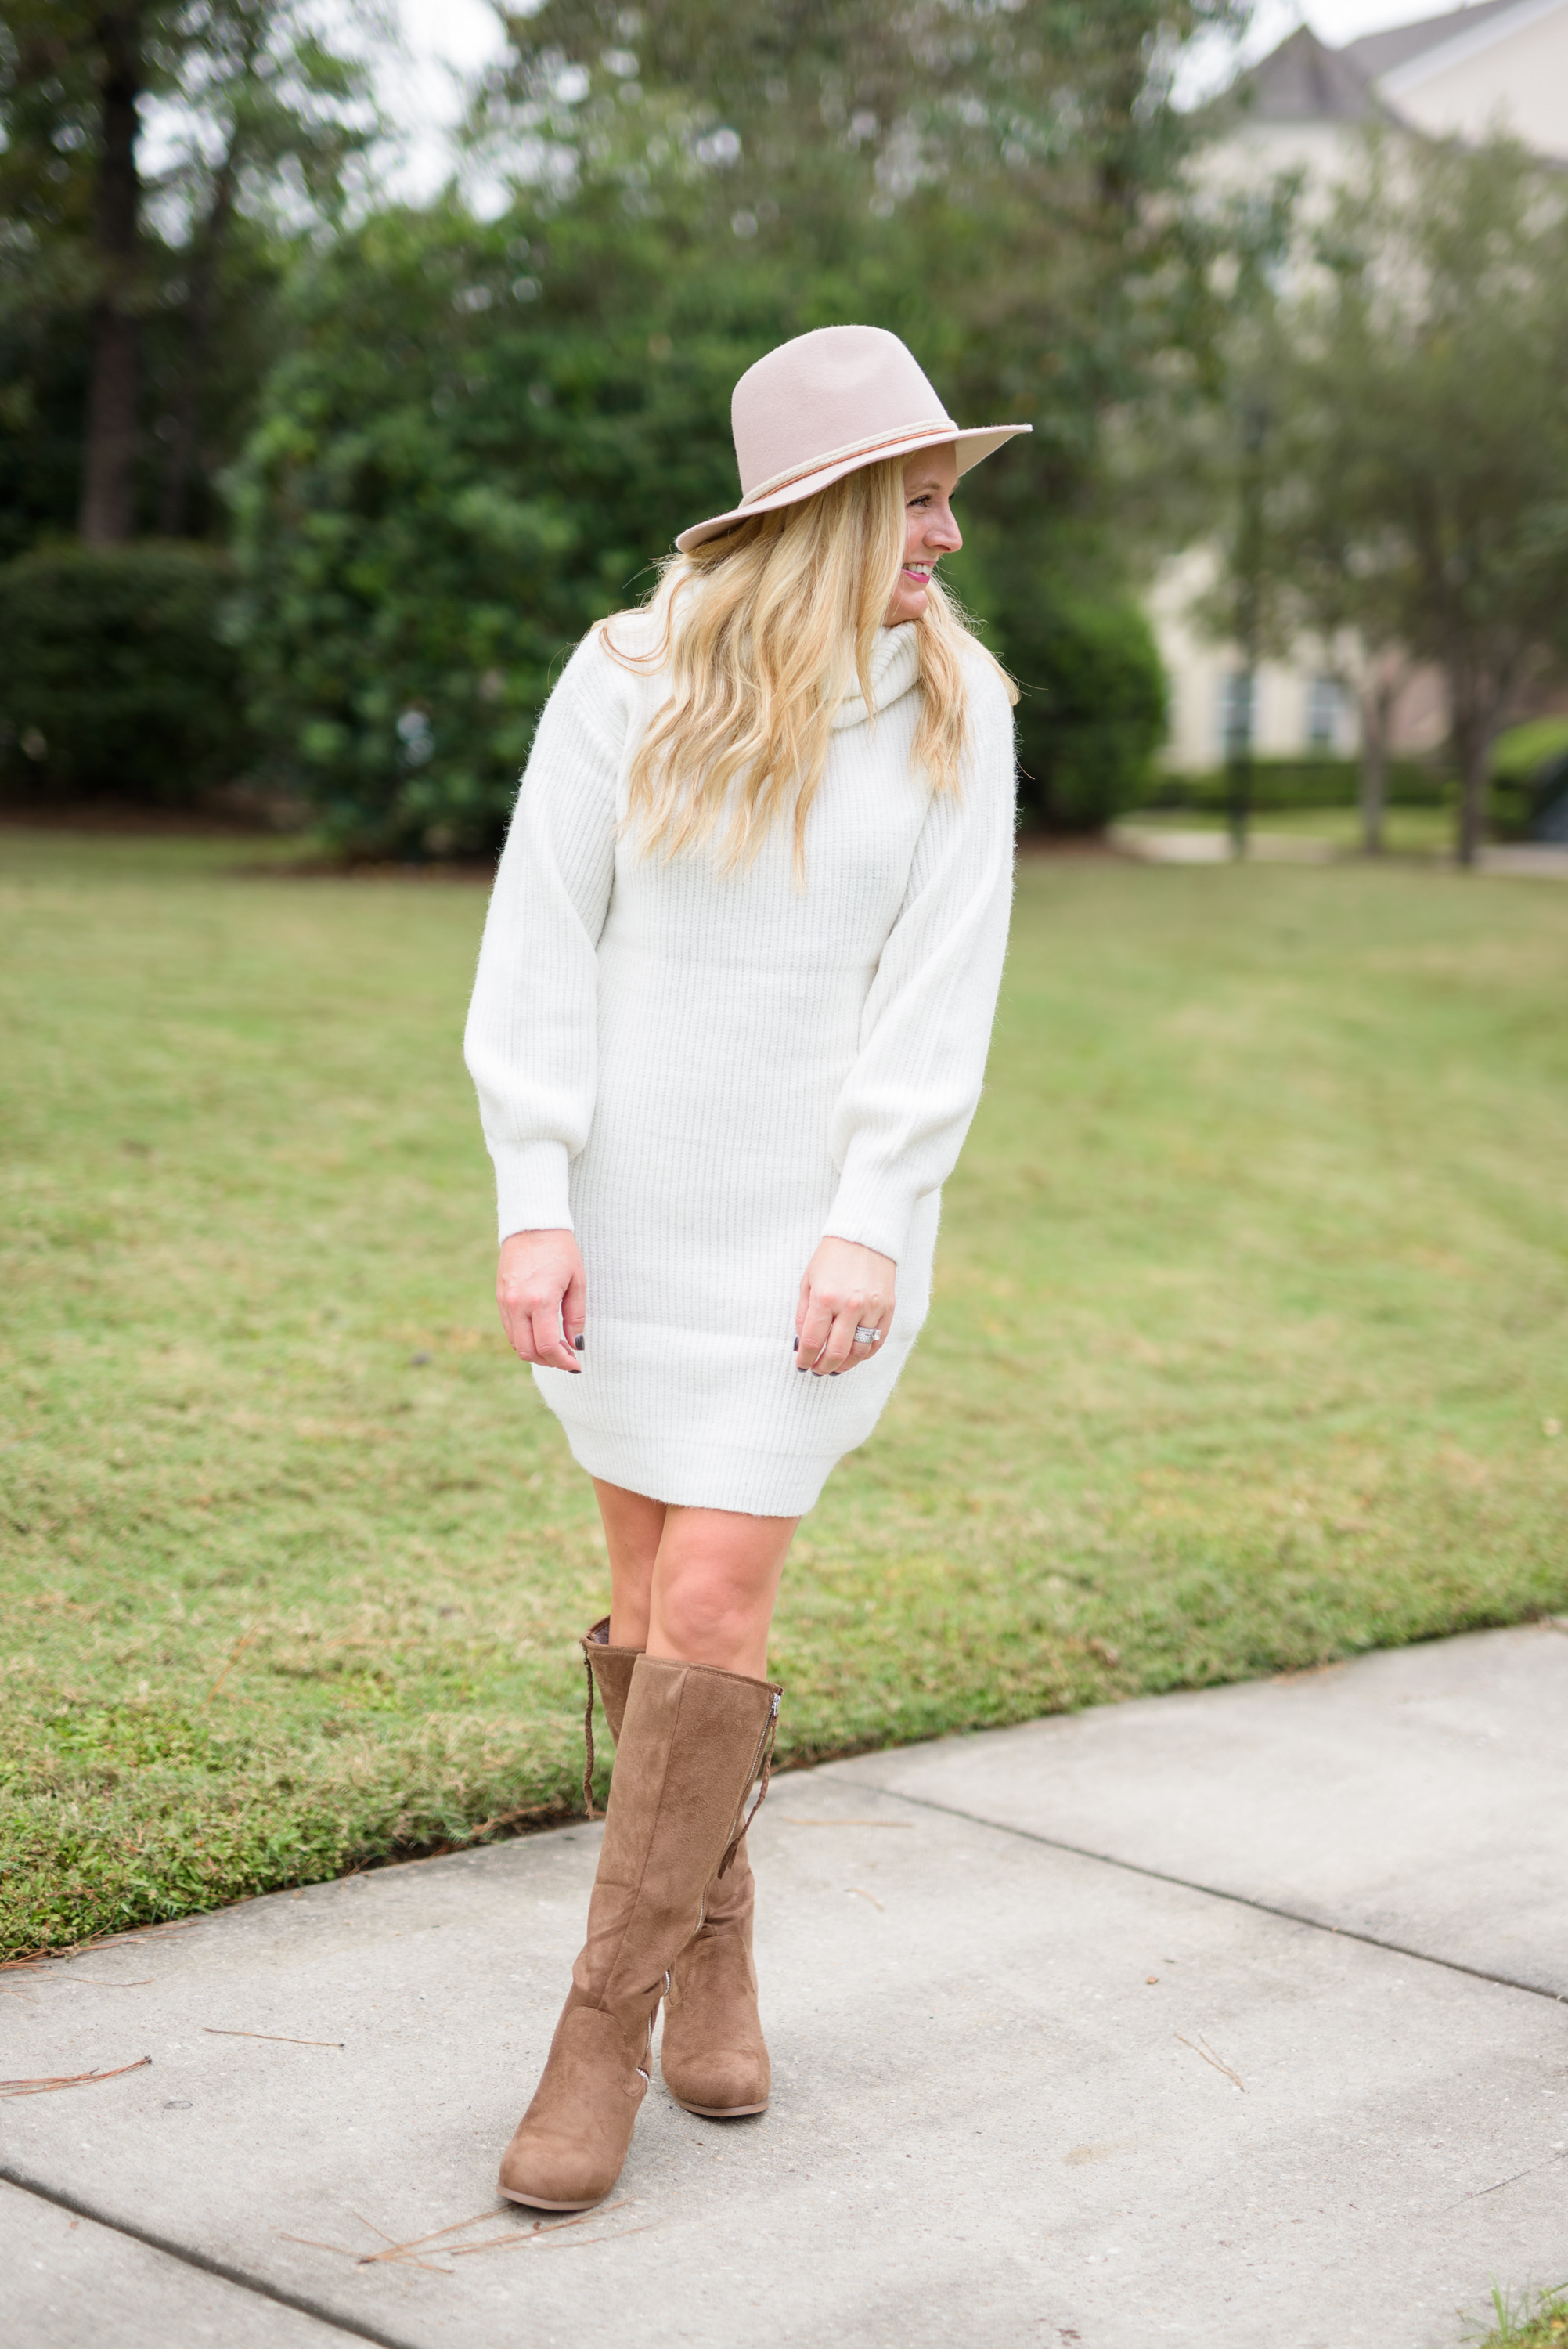 Knee High Boots by popular Houston fashion blog, Fancy Ashley: image of a woman standing outside and wearing a Nordstrom Rack TOPSHOP Turtleneck Sweater Dress, Nordstrom Rack JOURNEE Collection Sanora Knee High Boot, and Nordstrom Rack Frye Braided Crown Felted Fedora Hat.